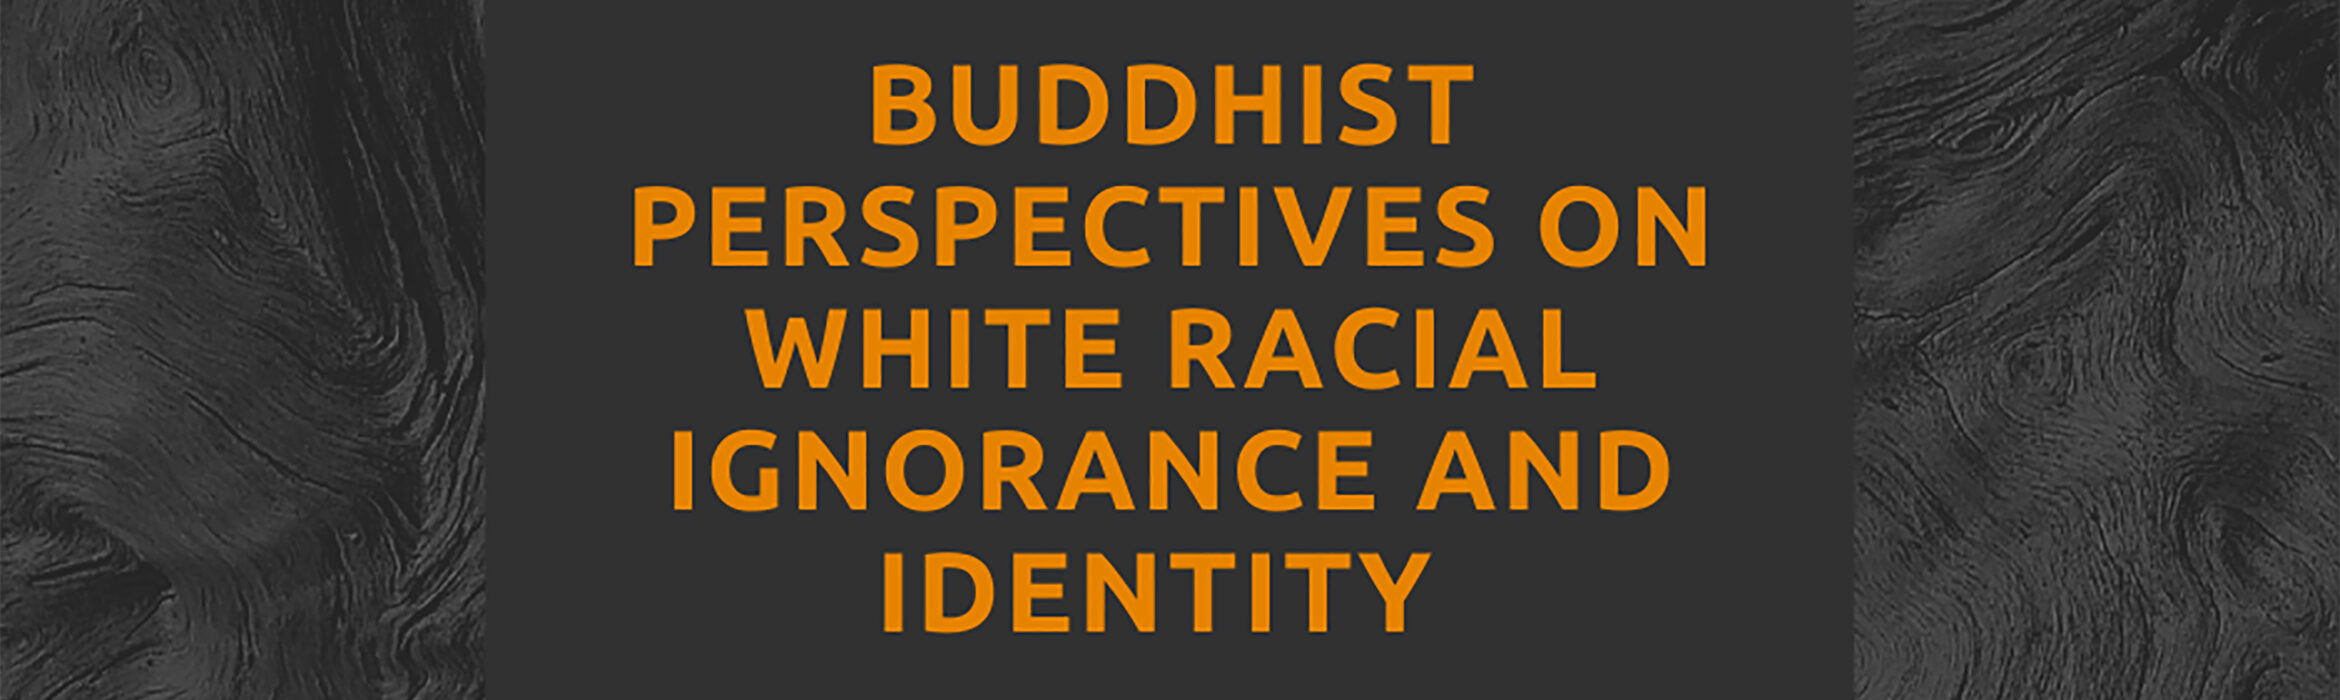 Buddhist Perspectives on White Racial Ignorance and Identity